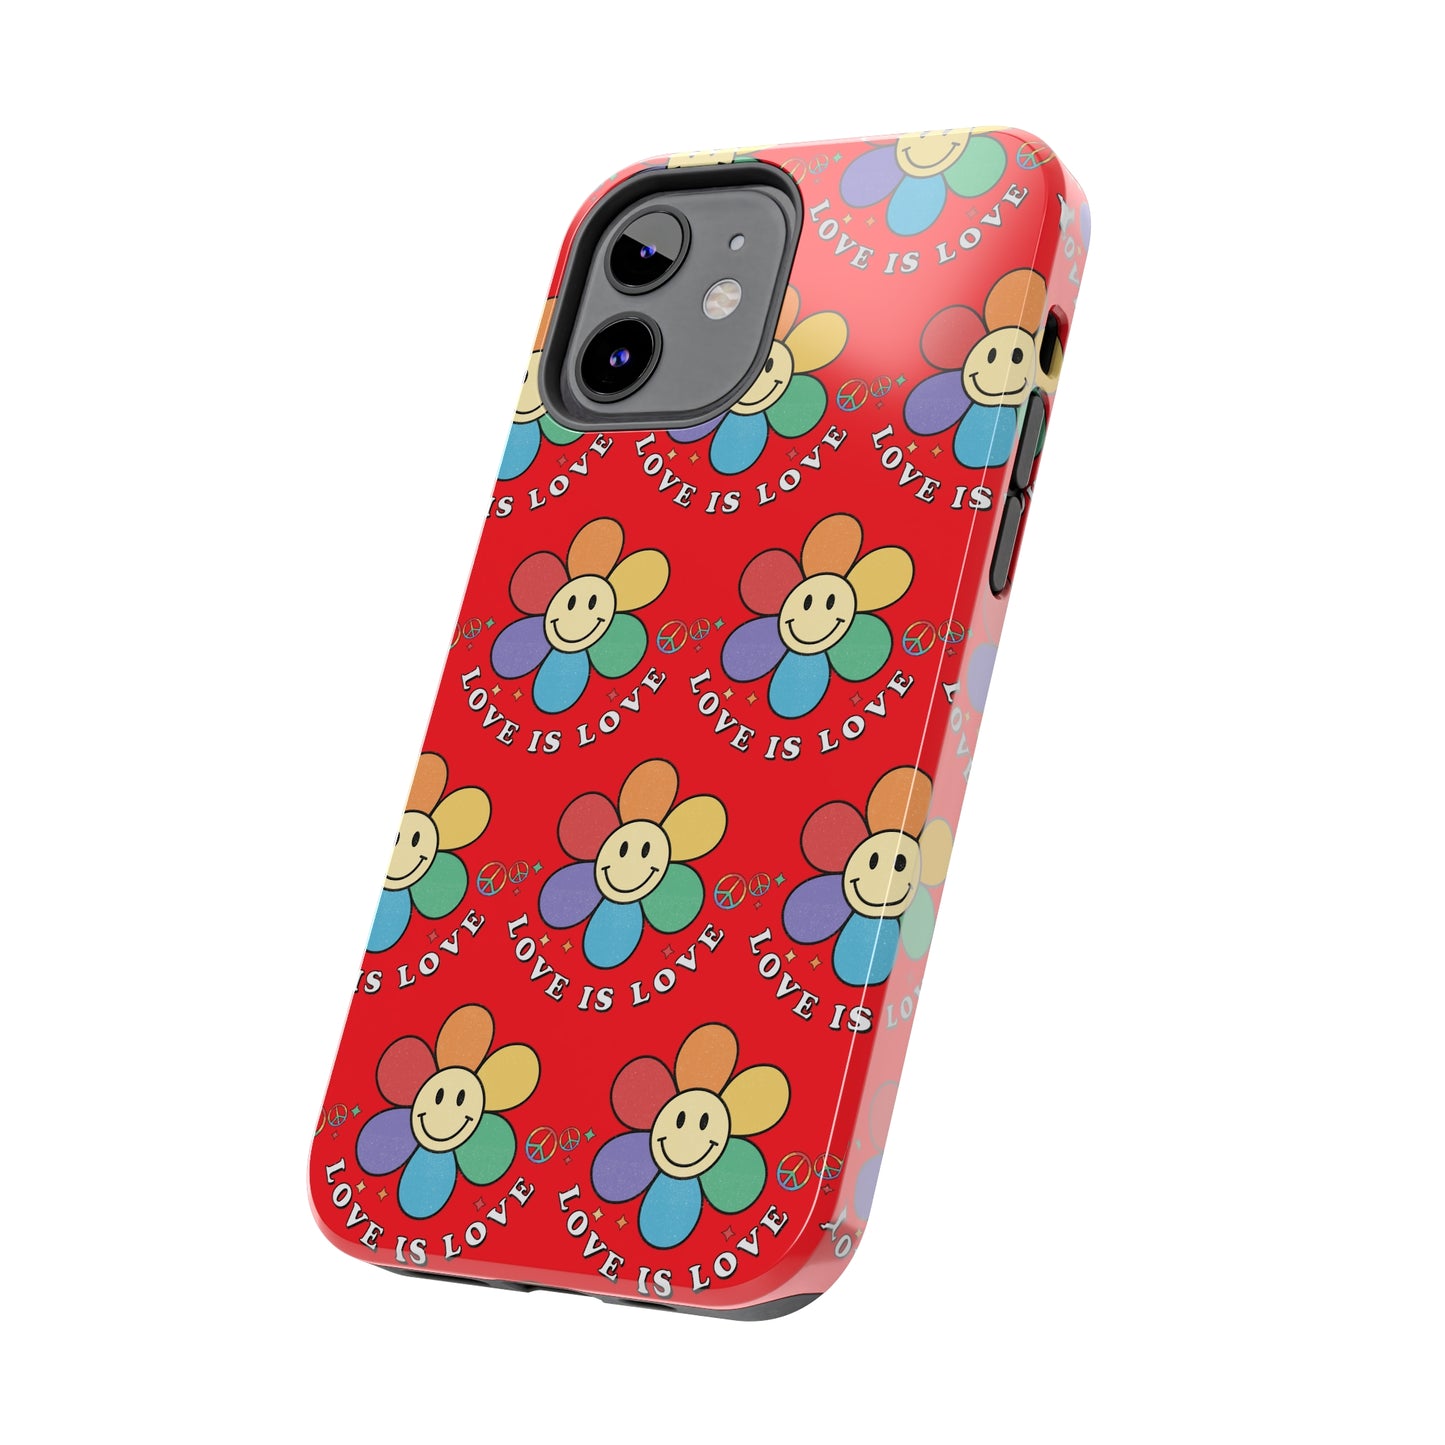 Love is Love Daisy: iPhone Tough Case Design - Wireless Charging - Superior Protection - Original Designs by TheGlassyLass.com